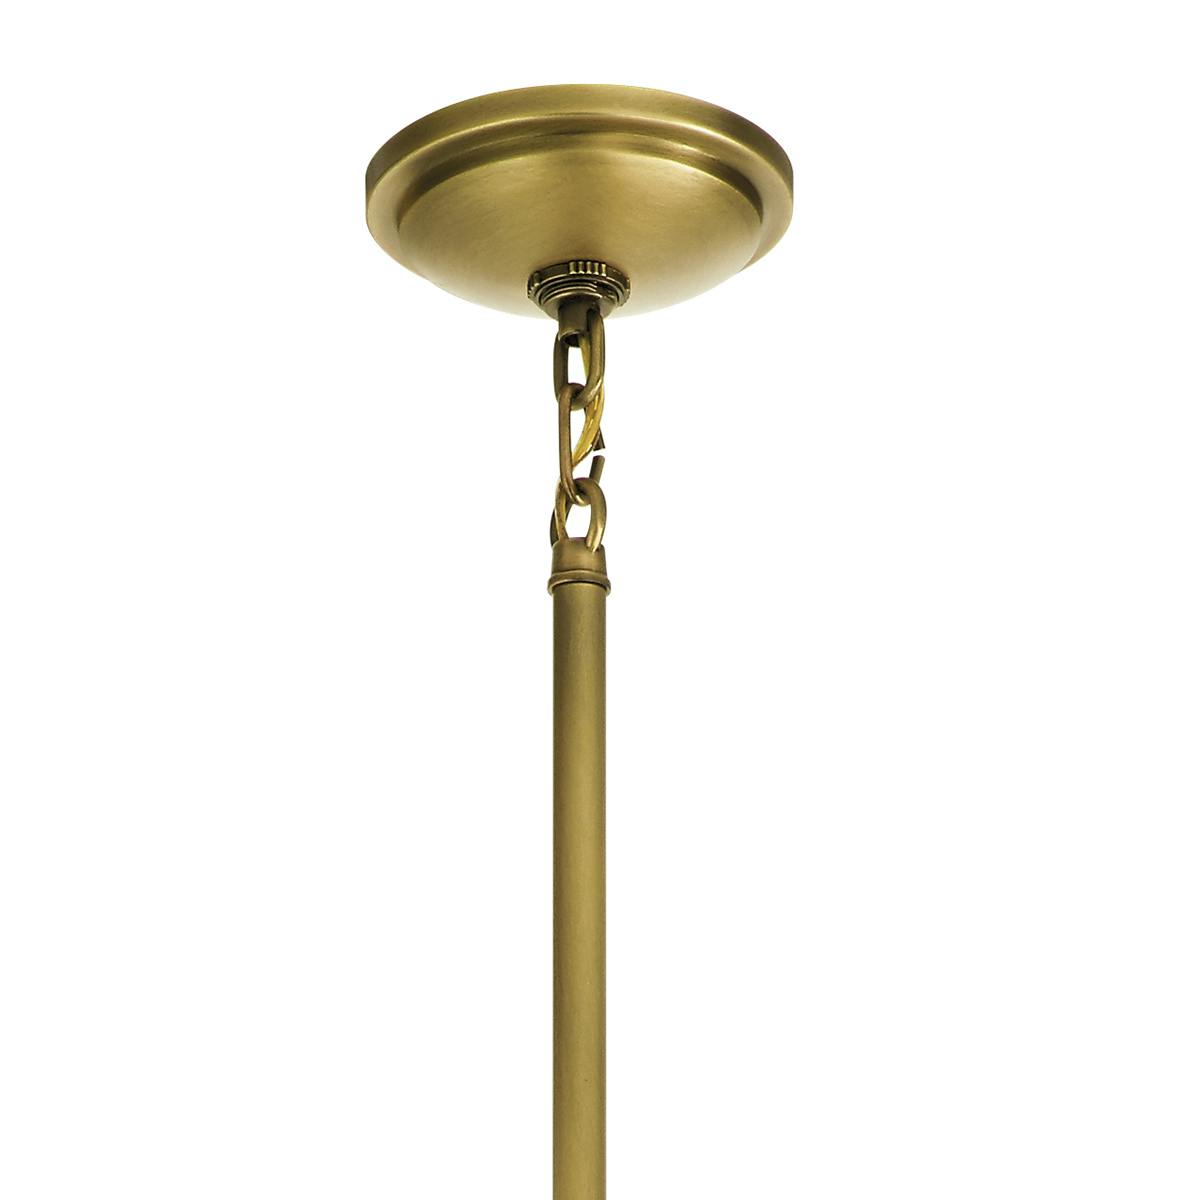 Canopy for the Tollis 23.75" 1 Light Foyer Pendant Brass on a white background